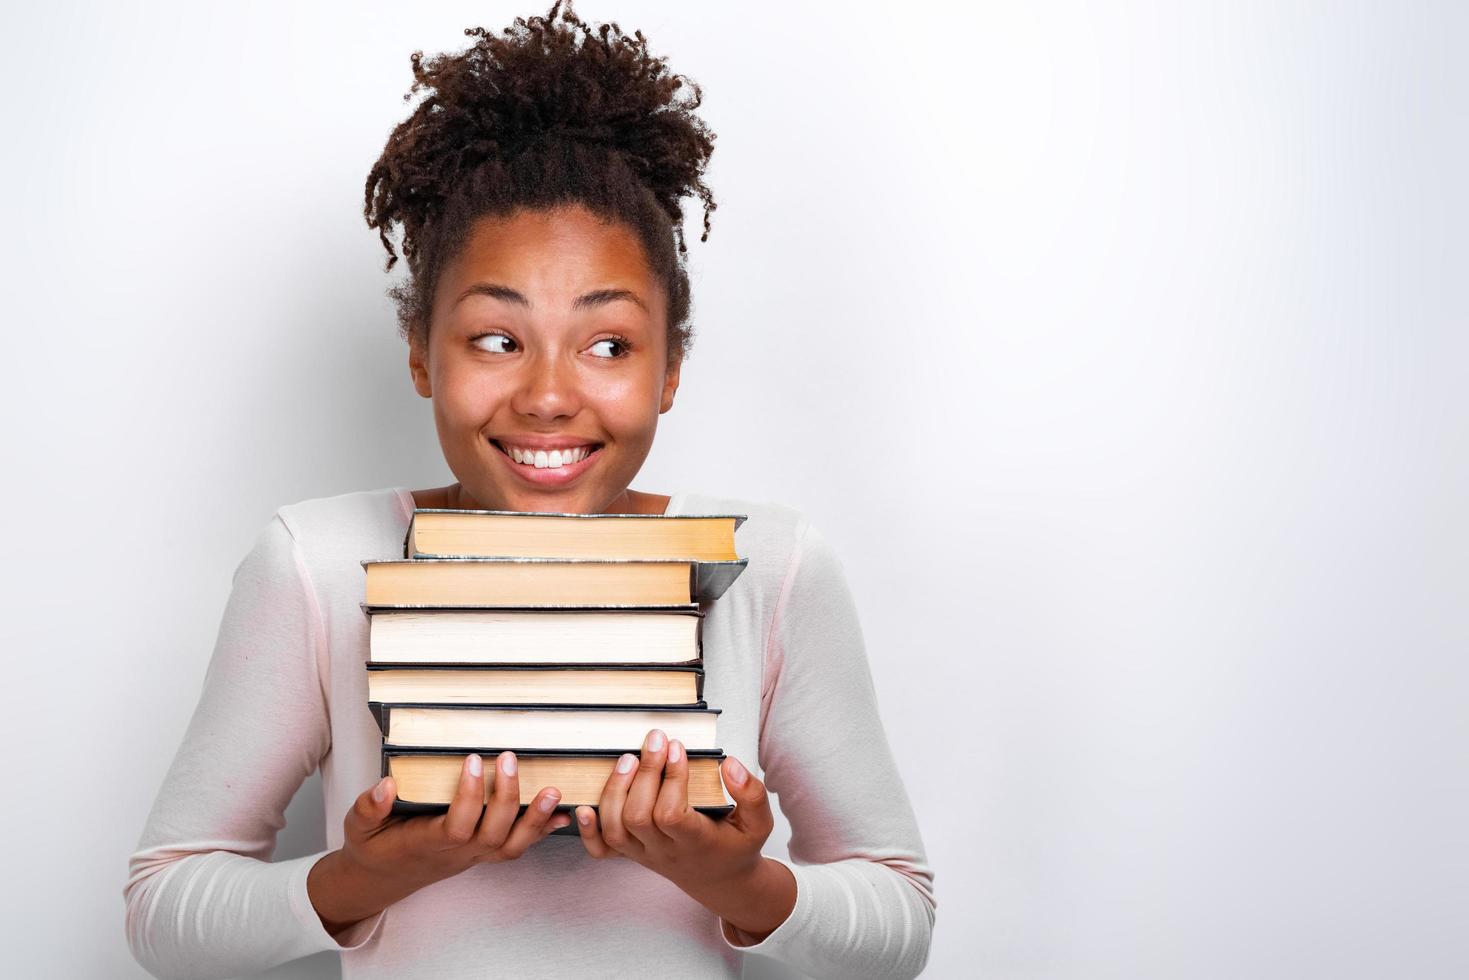 Portrait of happy nerd young girl holding books over white background. Back to school photo